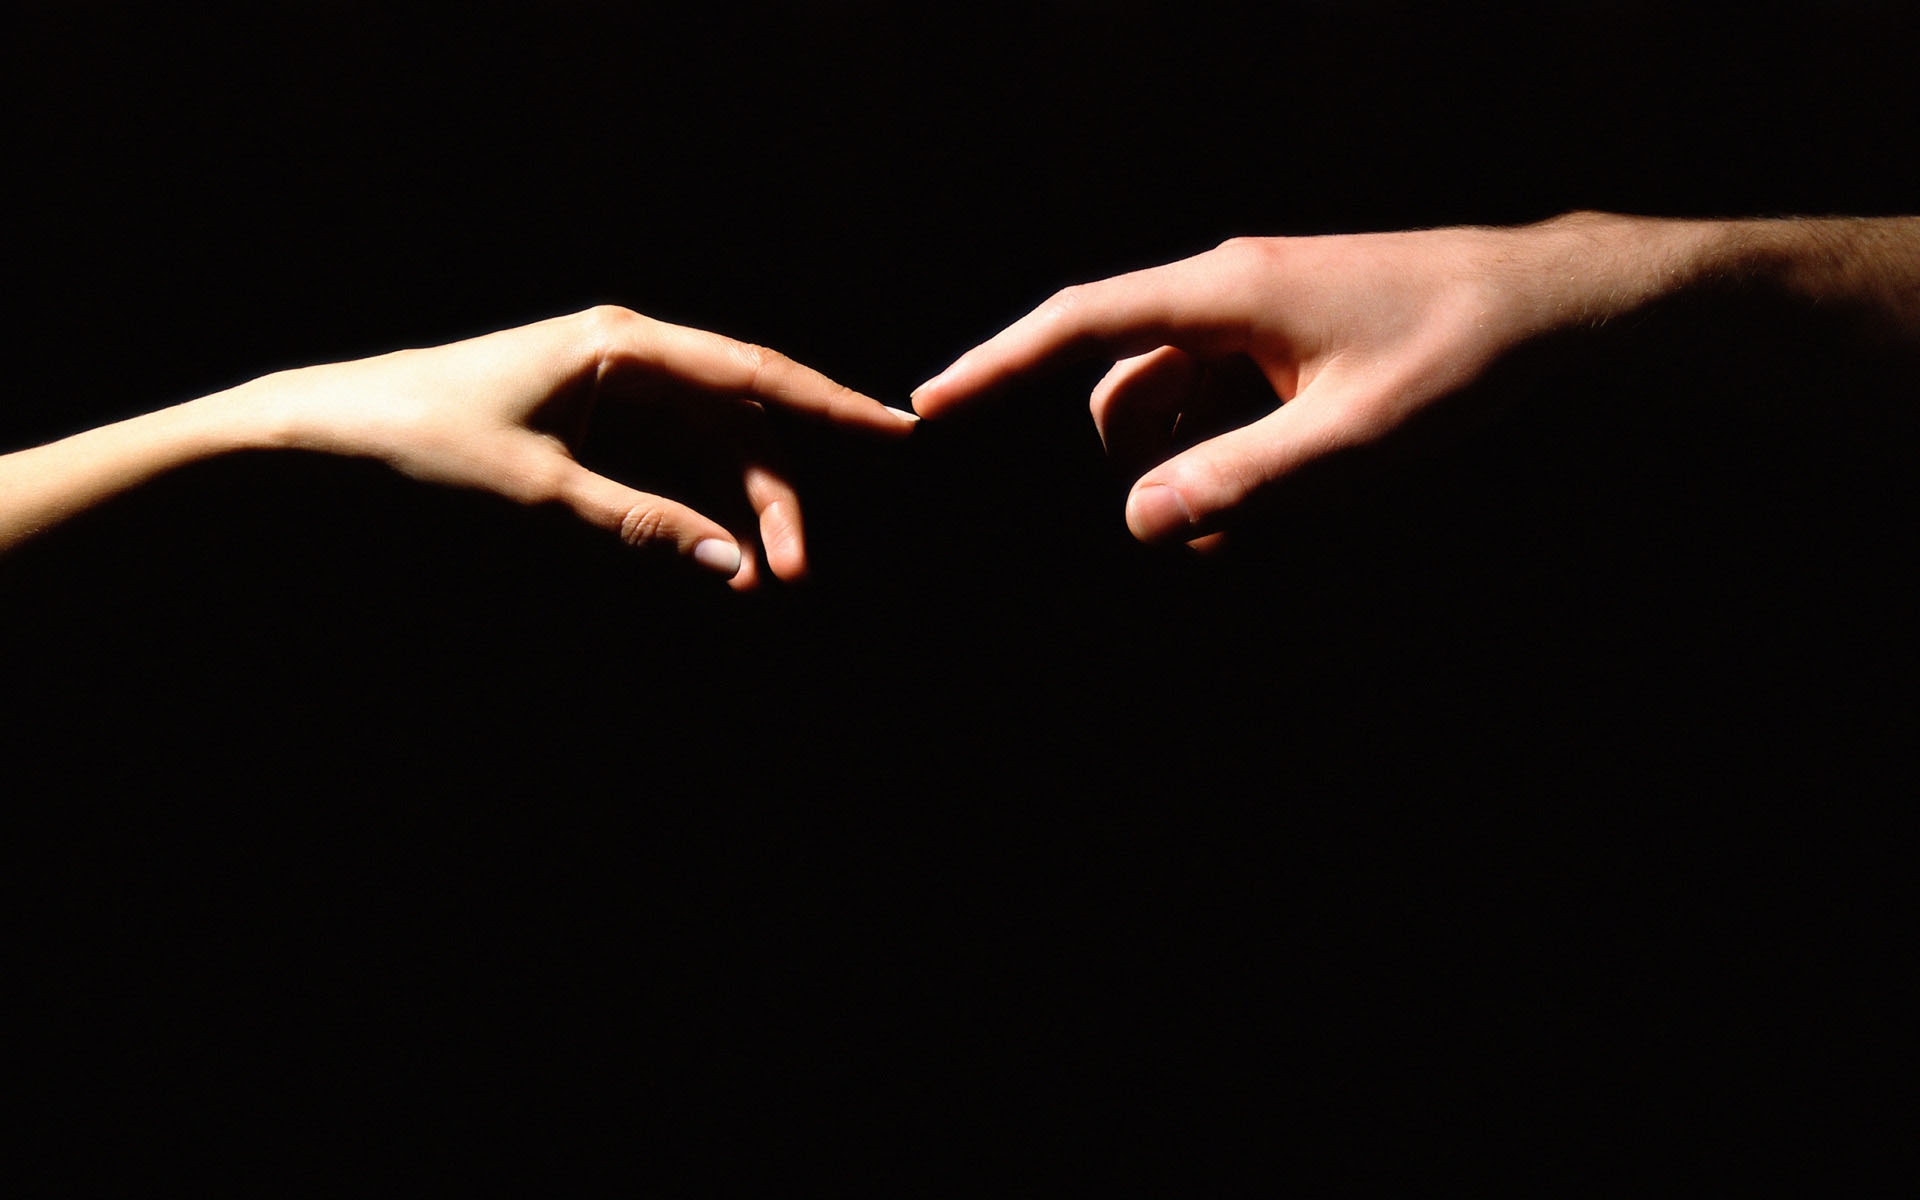 hands_fingers_love_touch_black_11259_1920x1200